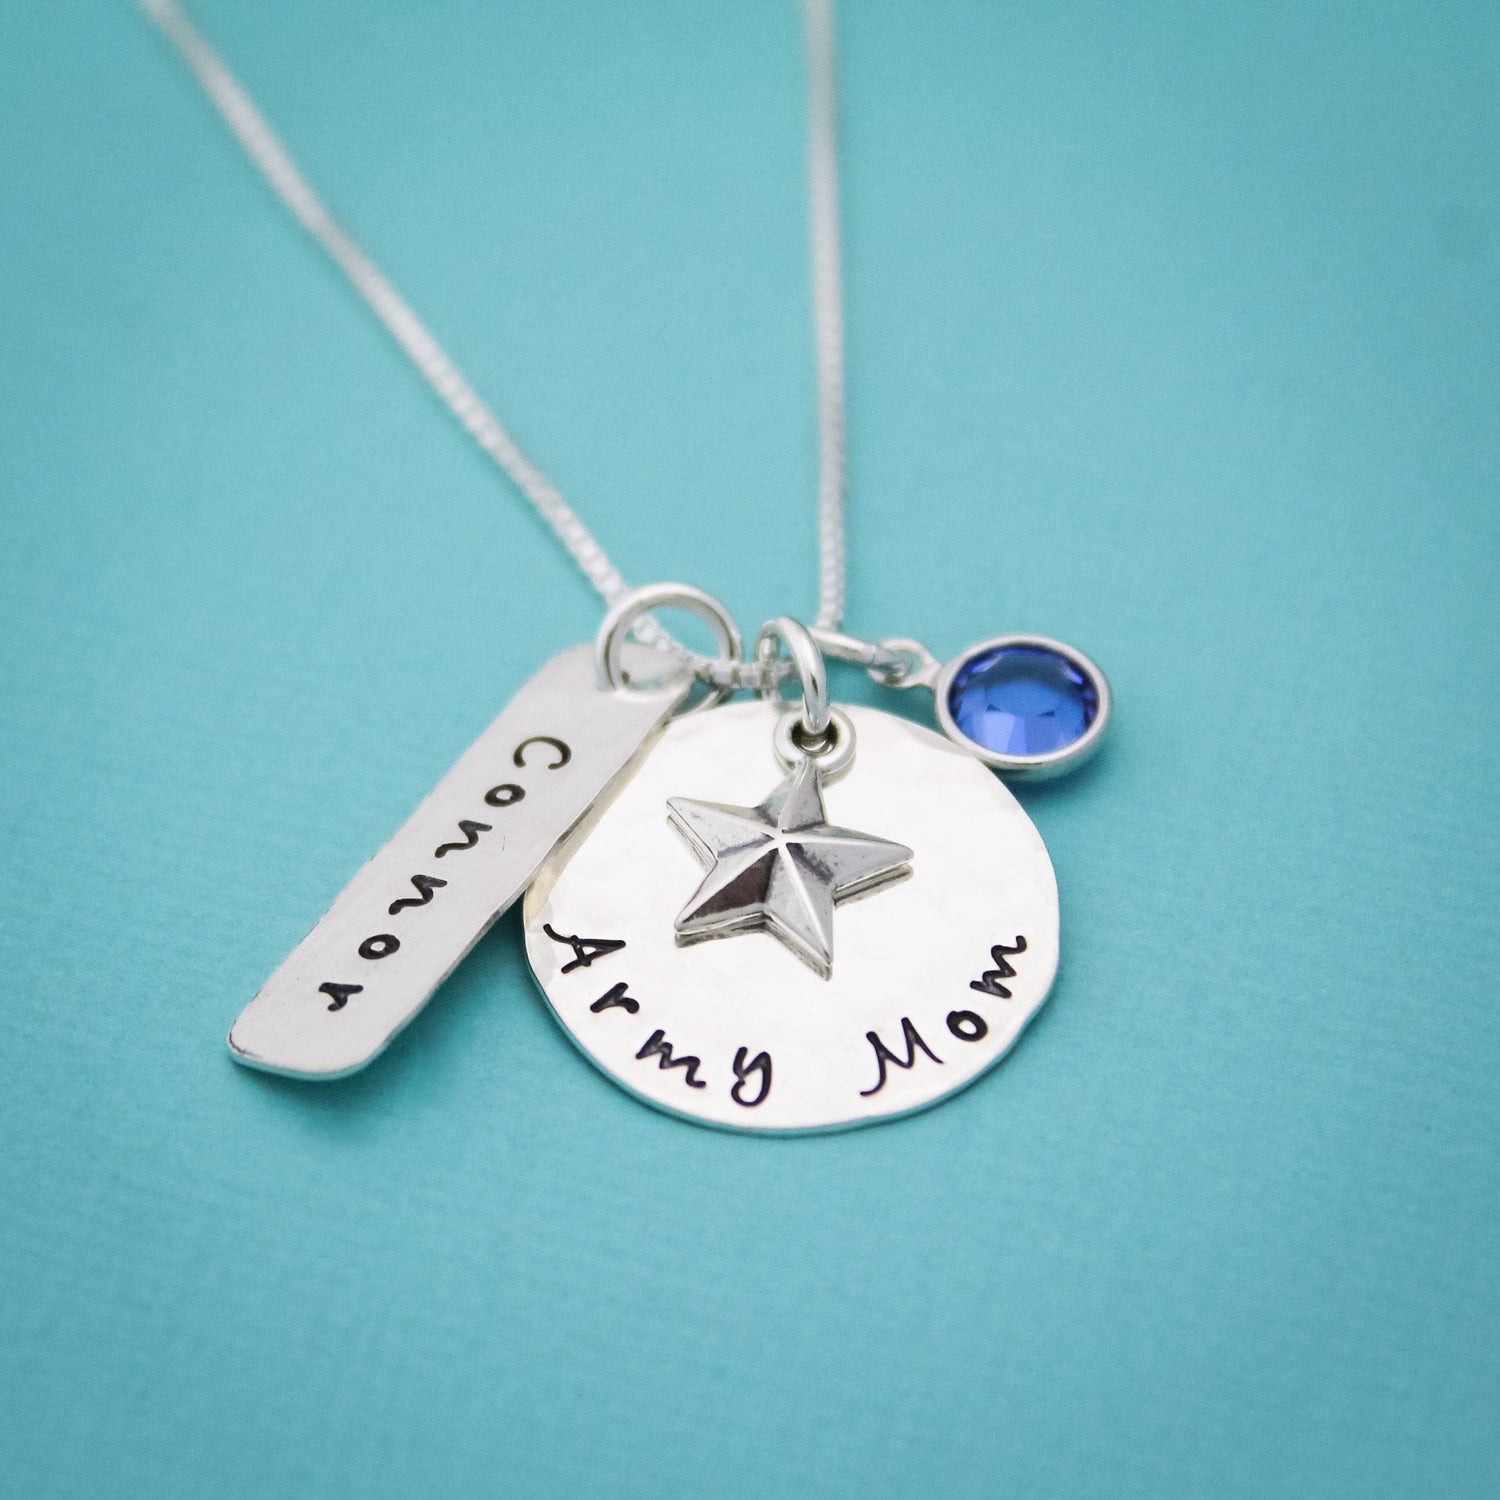 Army Mom Necklace in Sterling Silver with Star Charm, Name and Birthstone Customized Hand Stamped Jewelry